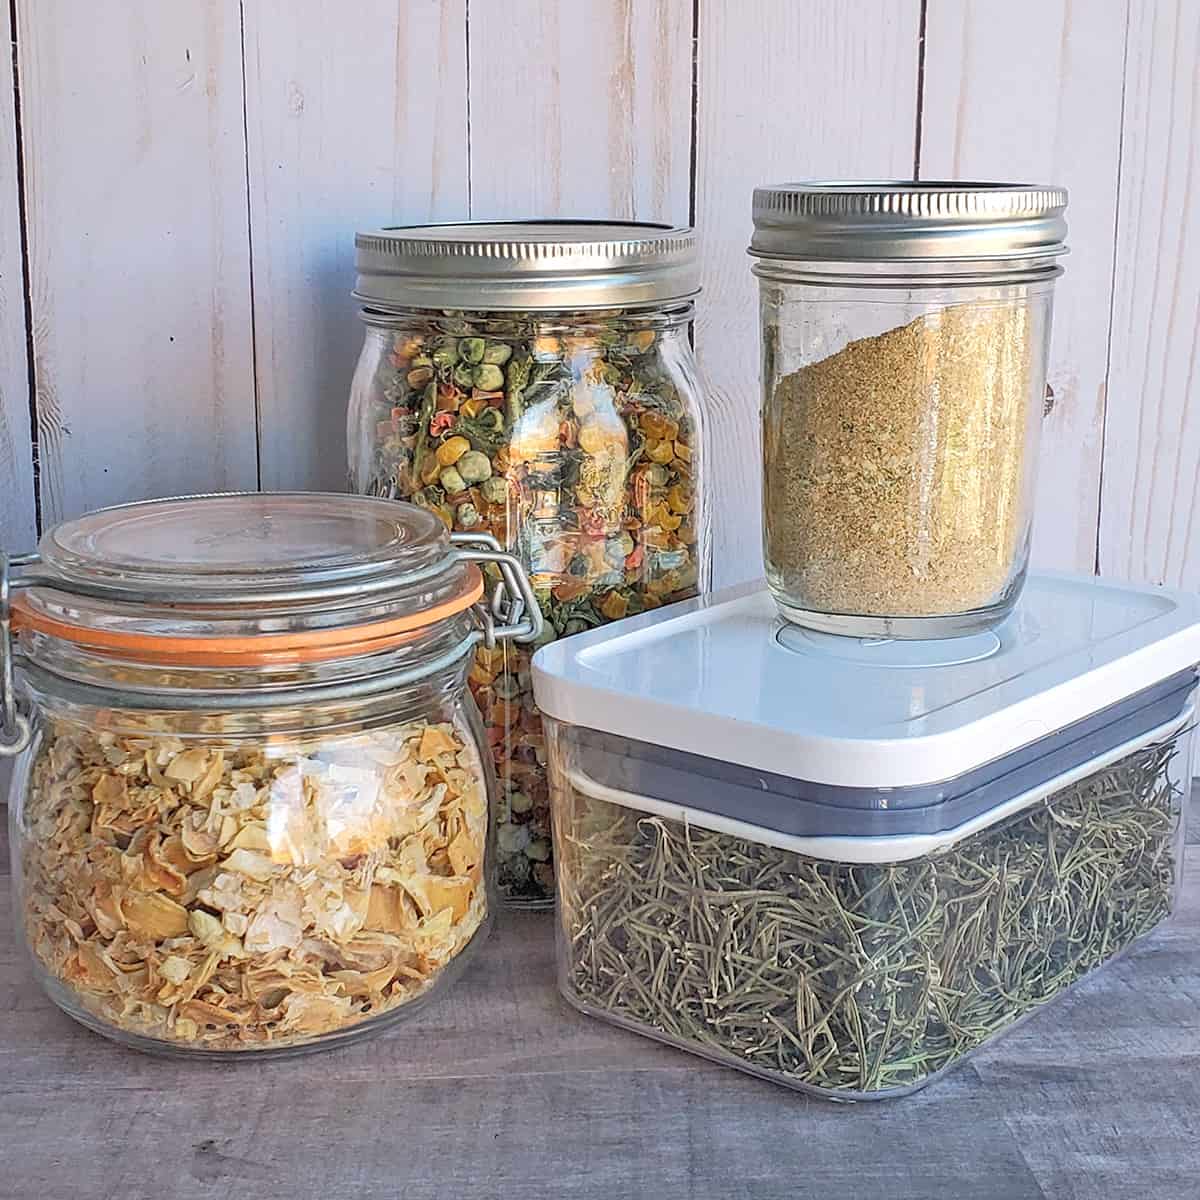 25 Unique Uses for a Vacuum Sealer - The Purposeful Pantry